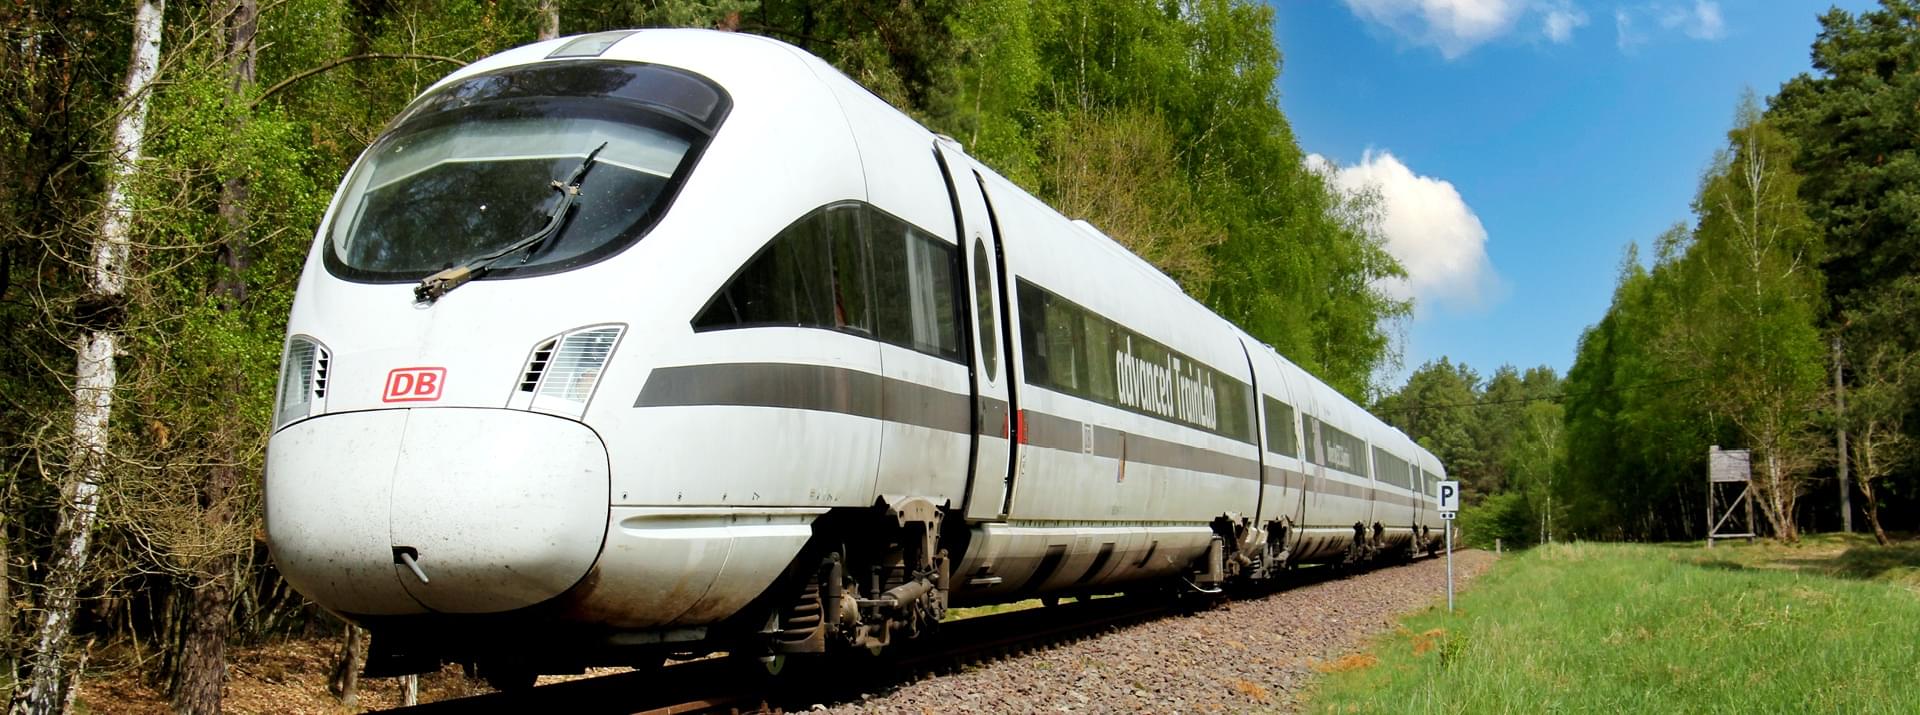 Picture of an ICE high speed train in 16:9